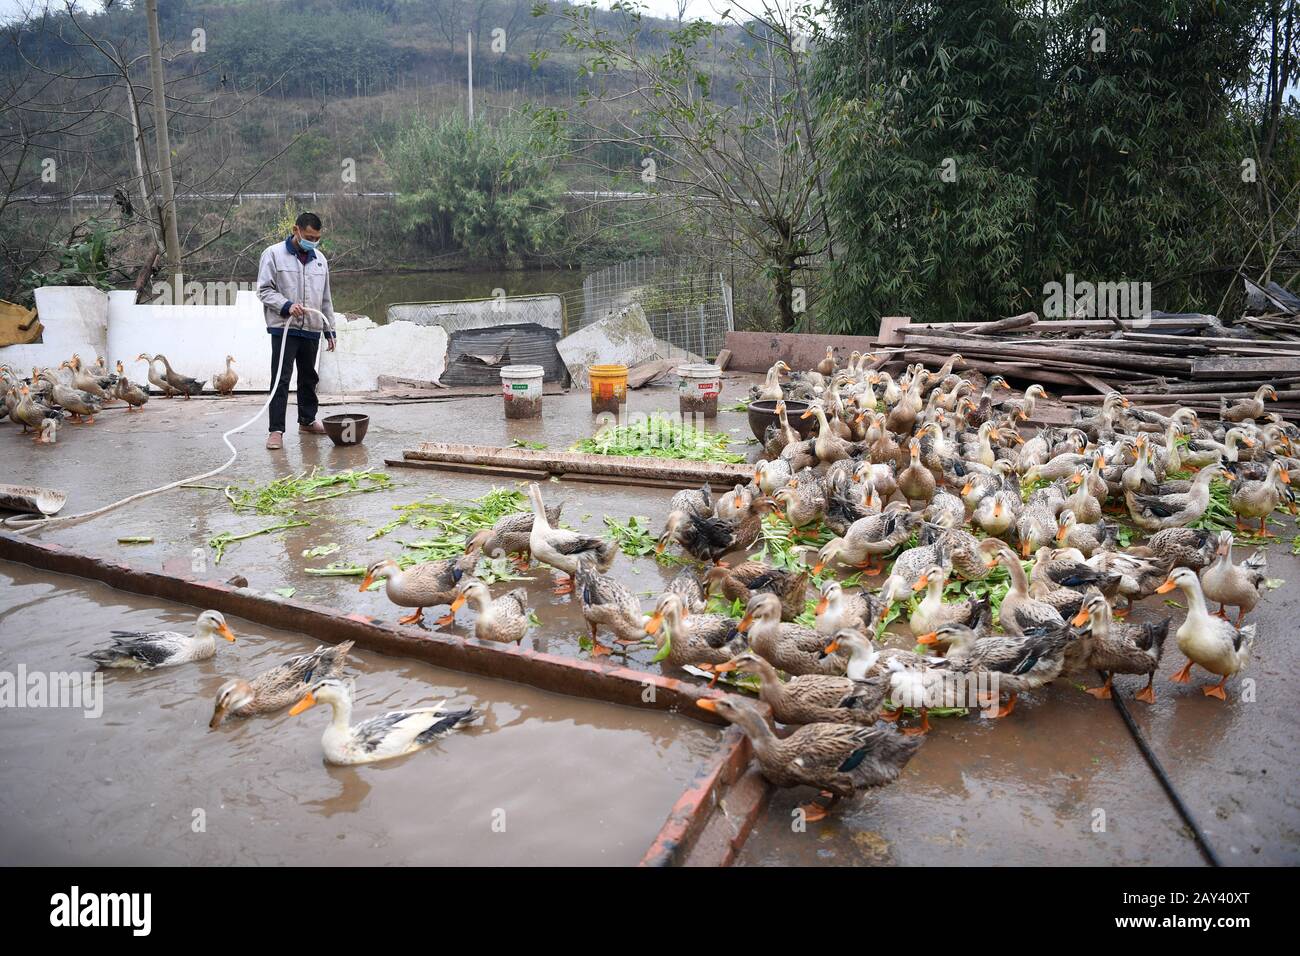 Chongqing. 14th Feb, 2020. Farmer Fu Zongyong feeds ducks at Shuangjing village of Yufengshan Town in Yubei District of southwest China's Chongqing Municipality, Feb. 14, 2020. Since the outbreak of the novel coronavirus, Fu Zongyong, a poverty-striken farmer has been unable to sell his ducks due to the closing of live poultry markets. Local authorities sent staff to help him with quarantine and sales of ducks to ensure his income during the battle against the epidemic. Credit: Tang Yi/Xinhua/Alamy Live News Stock Photo